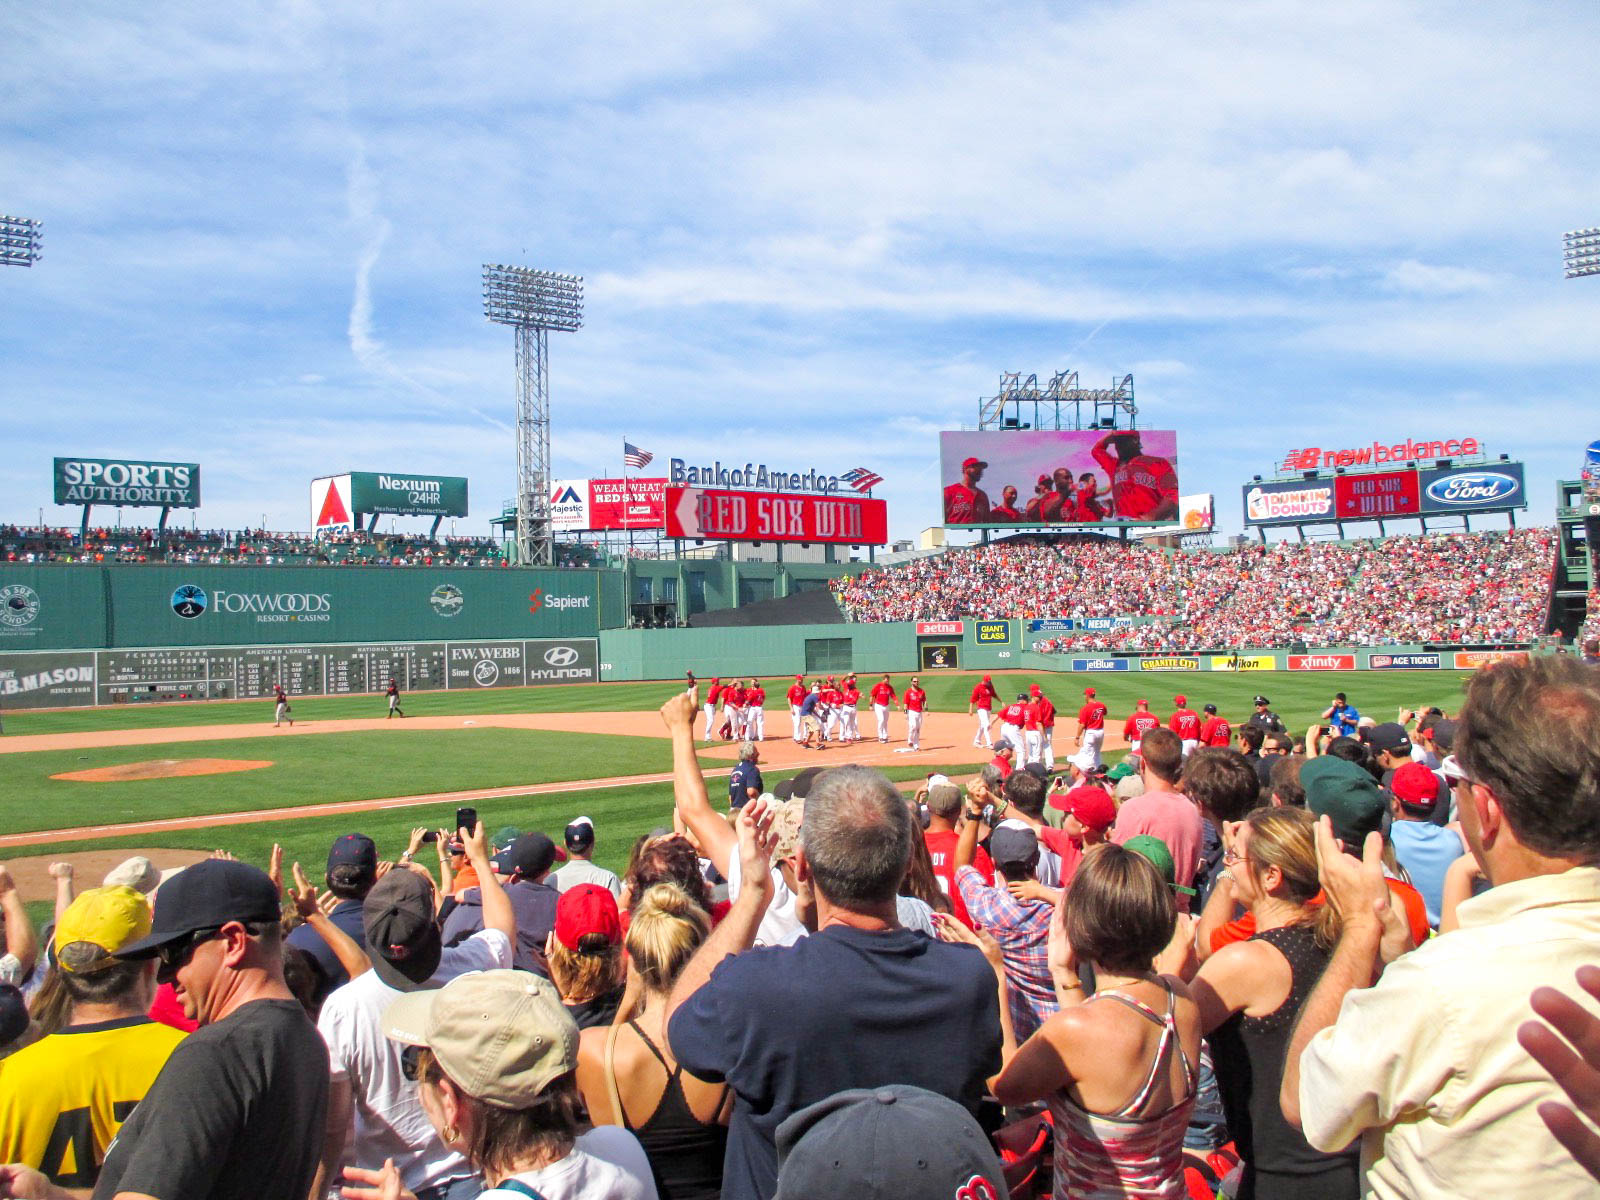 Get into Fenway the fast way.